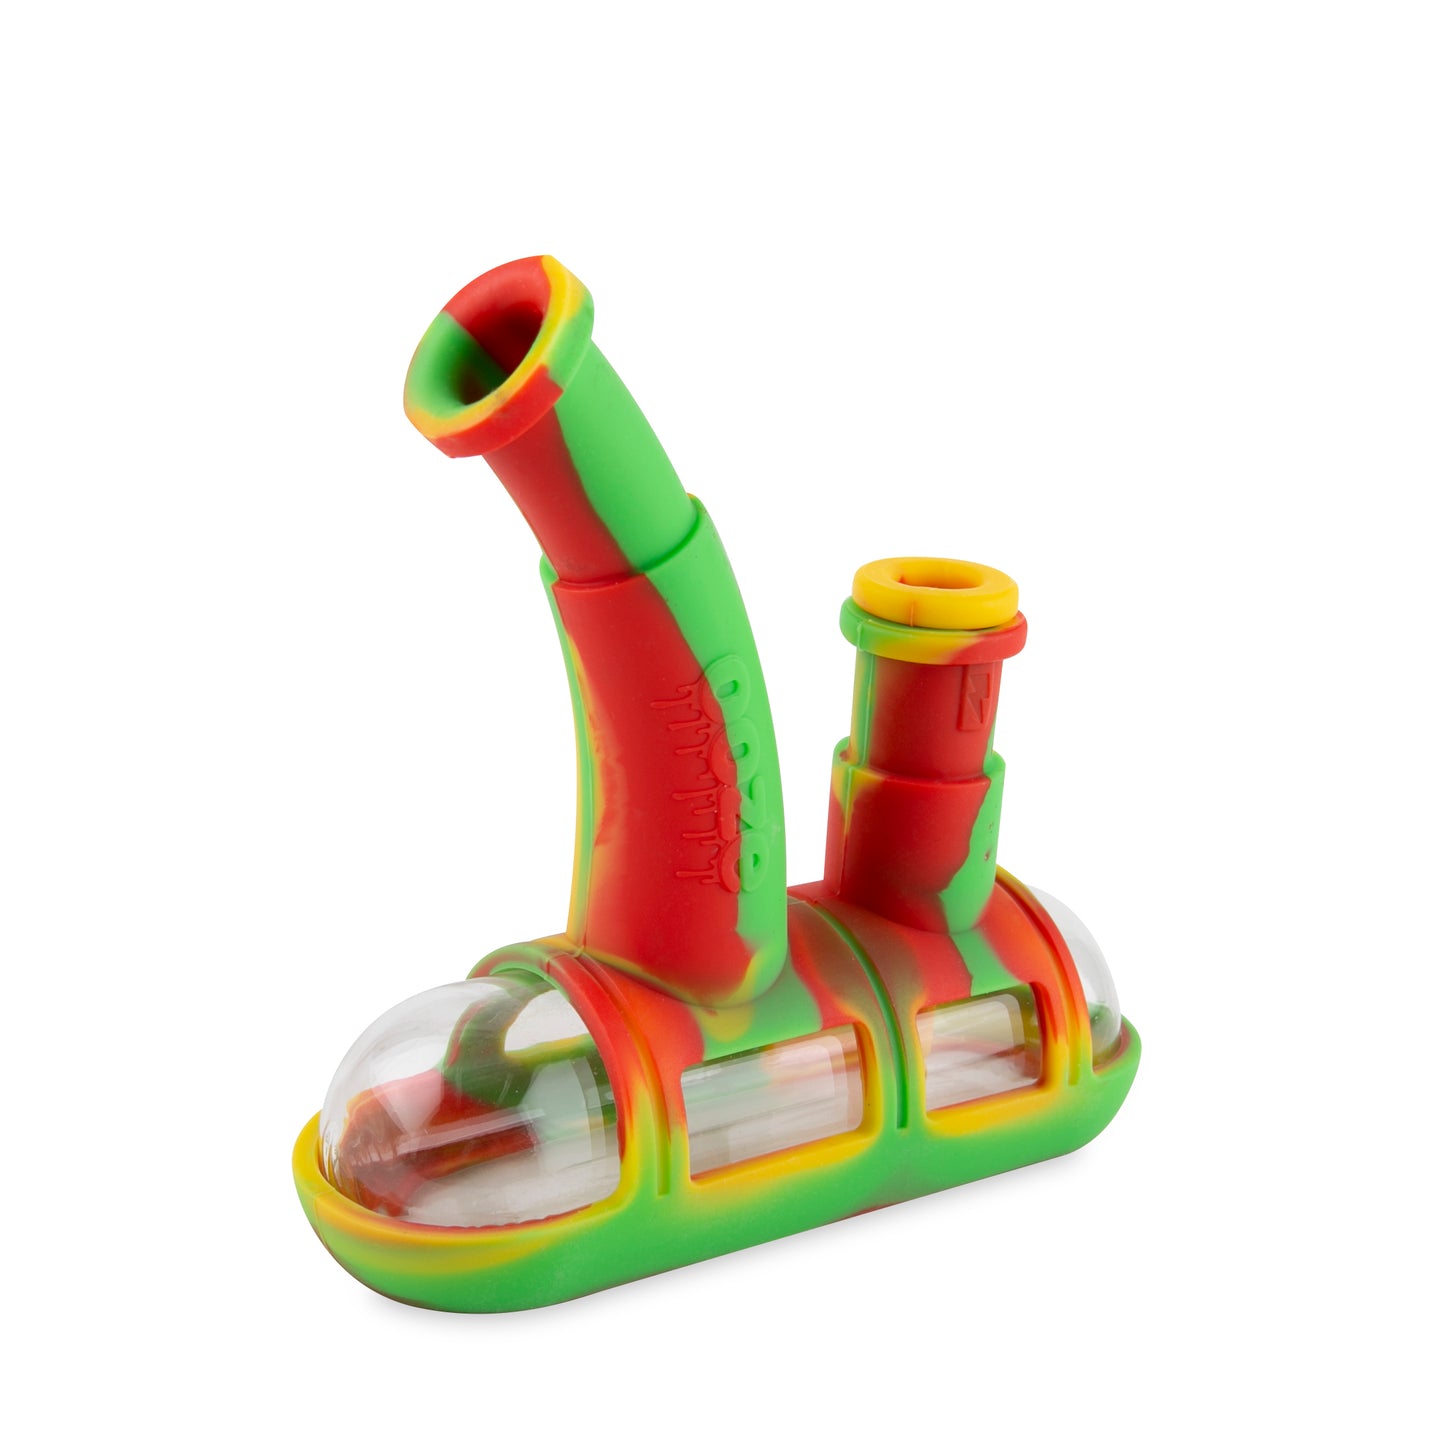 Ooze Steamboat Silicone Water Bubbler & Dab Rig - Rasta